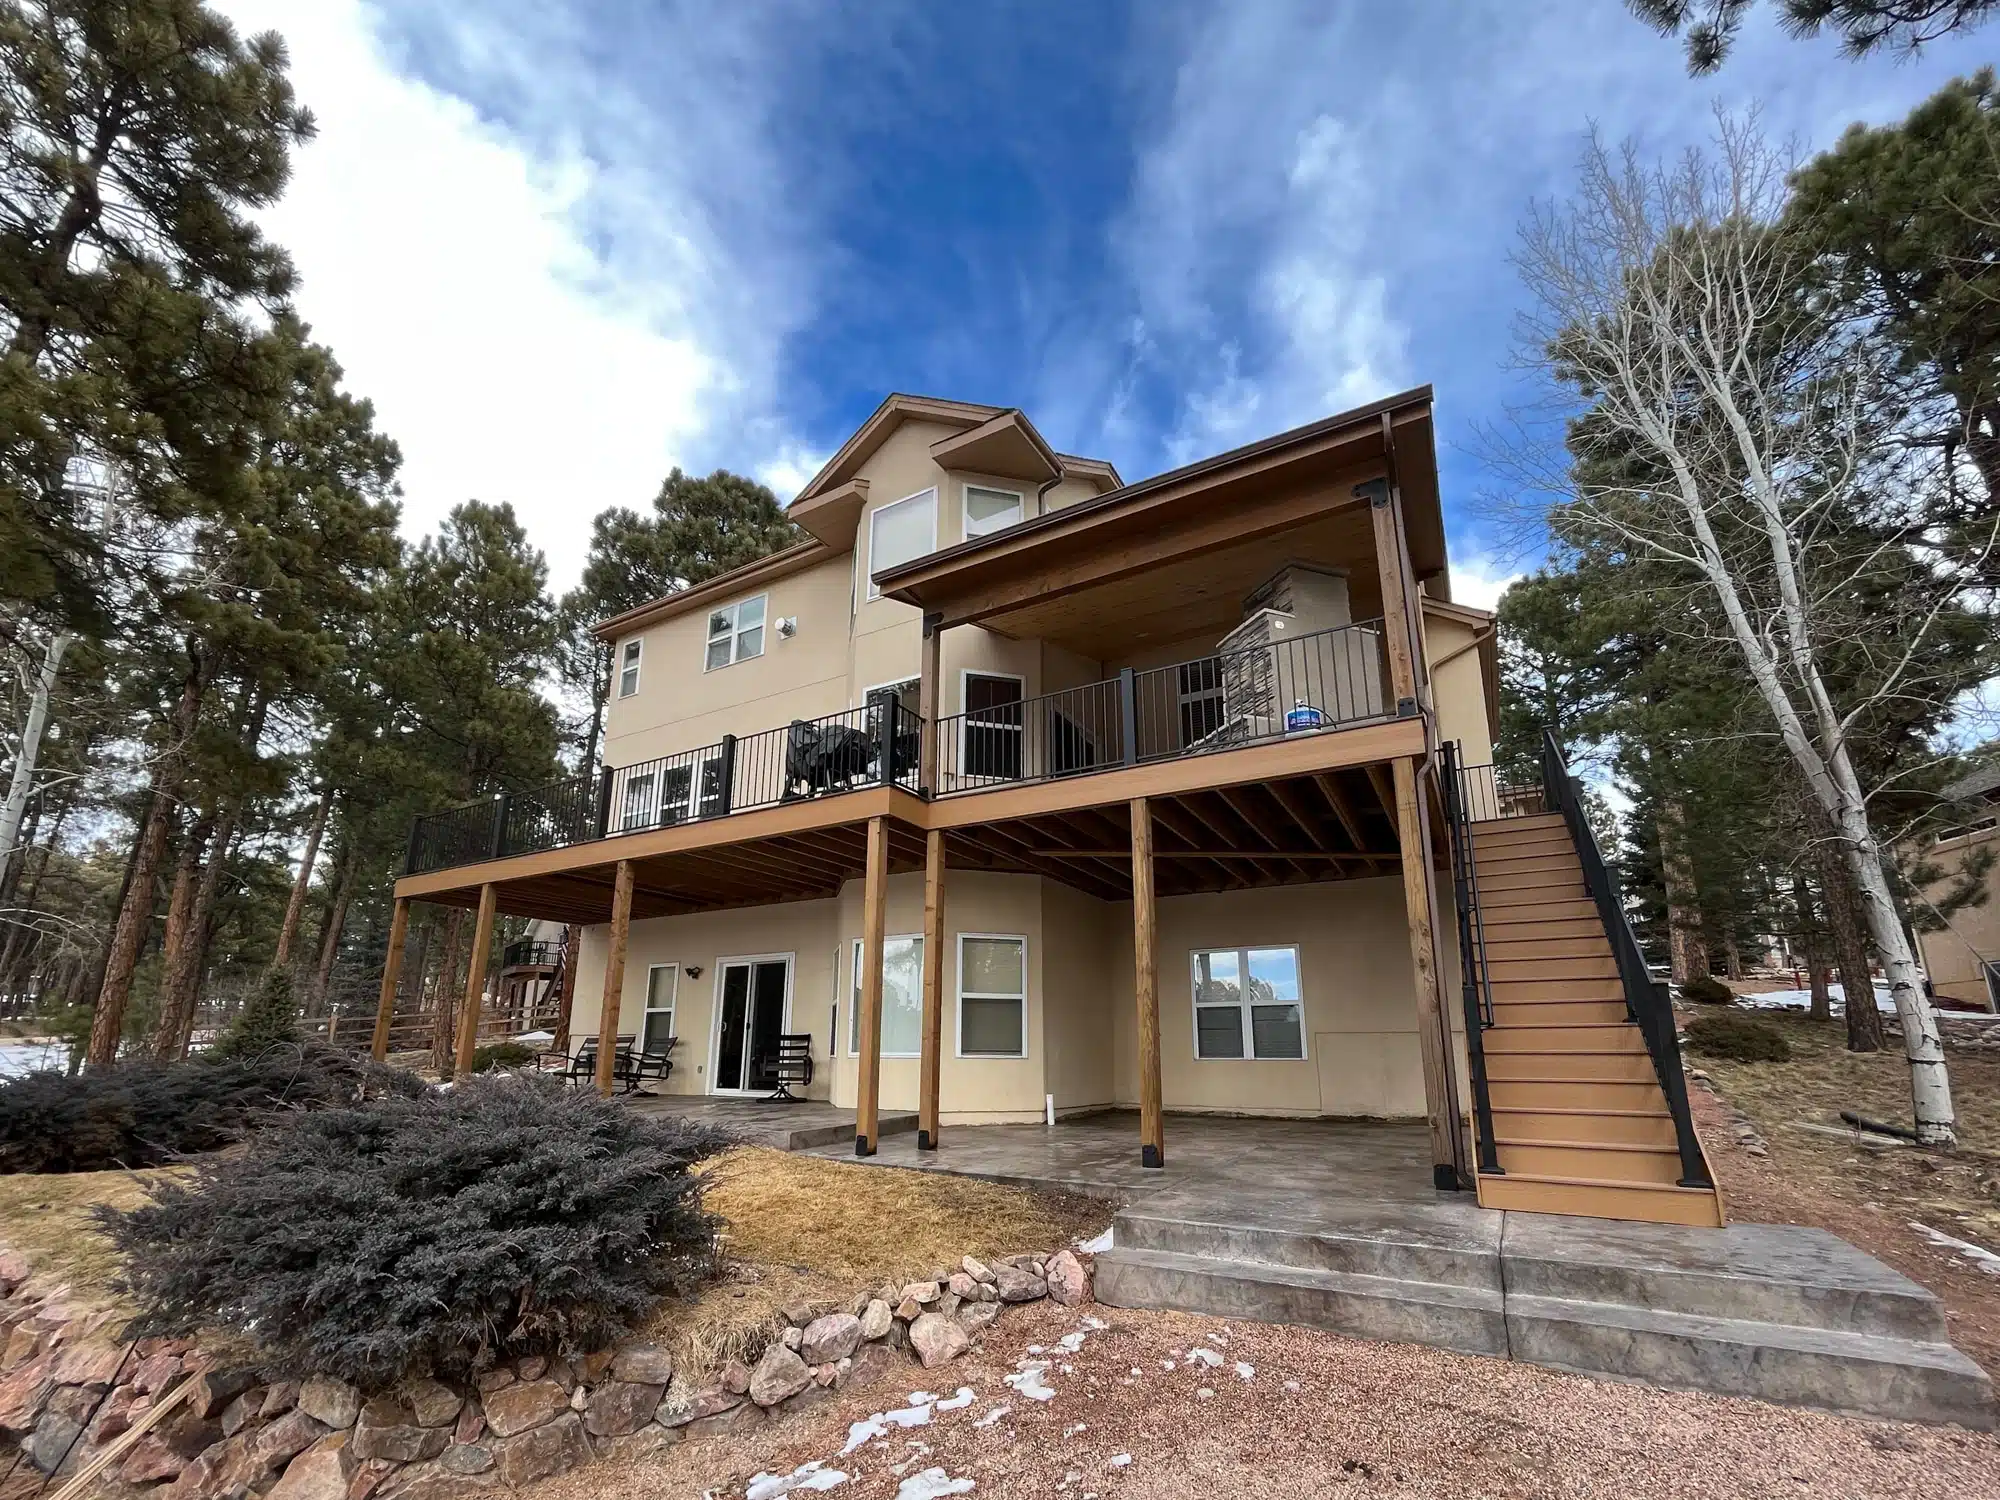 Get the latest news on Multi-Level Deck with Covered Patio - Footprint Decks and Design proudly serves Colorado Springs, Monument, Castlerock, Denver, Peyton, and Black Forrest.